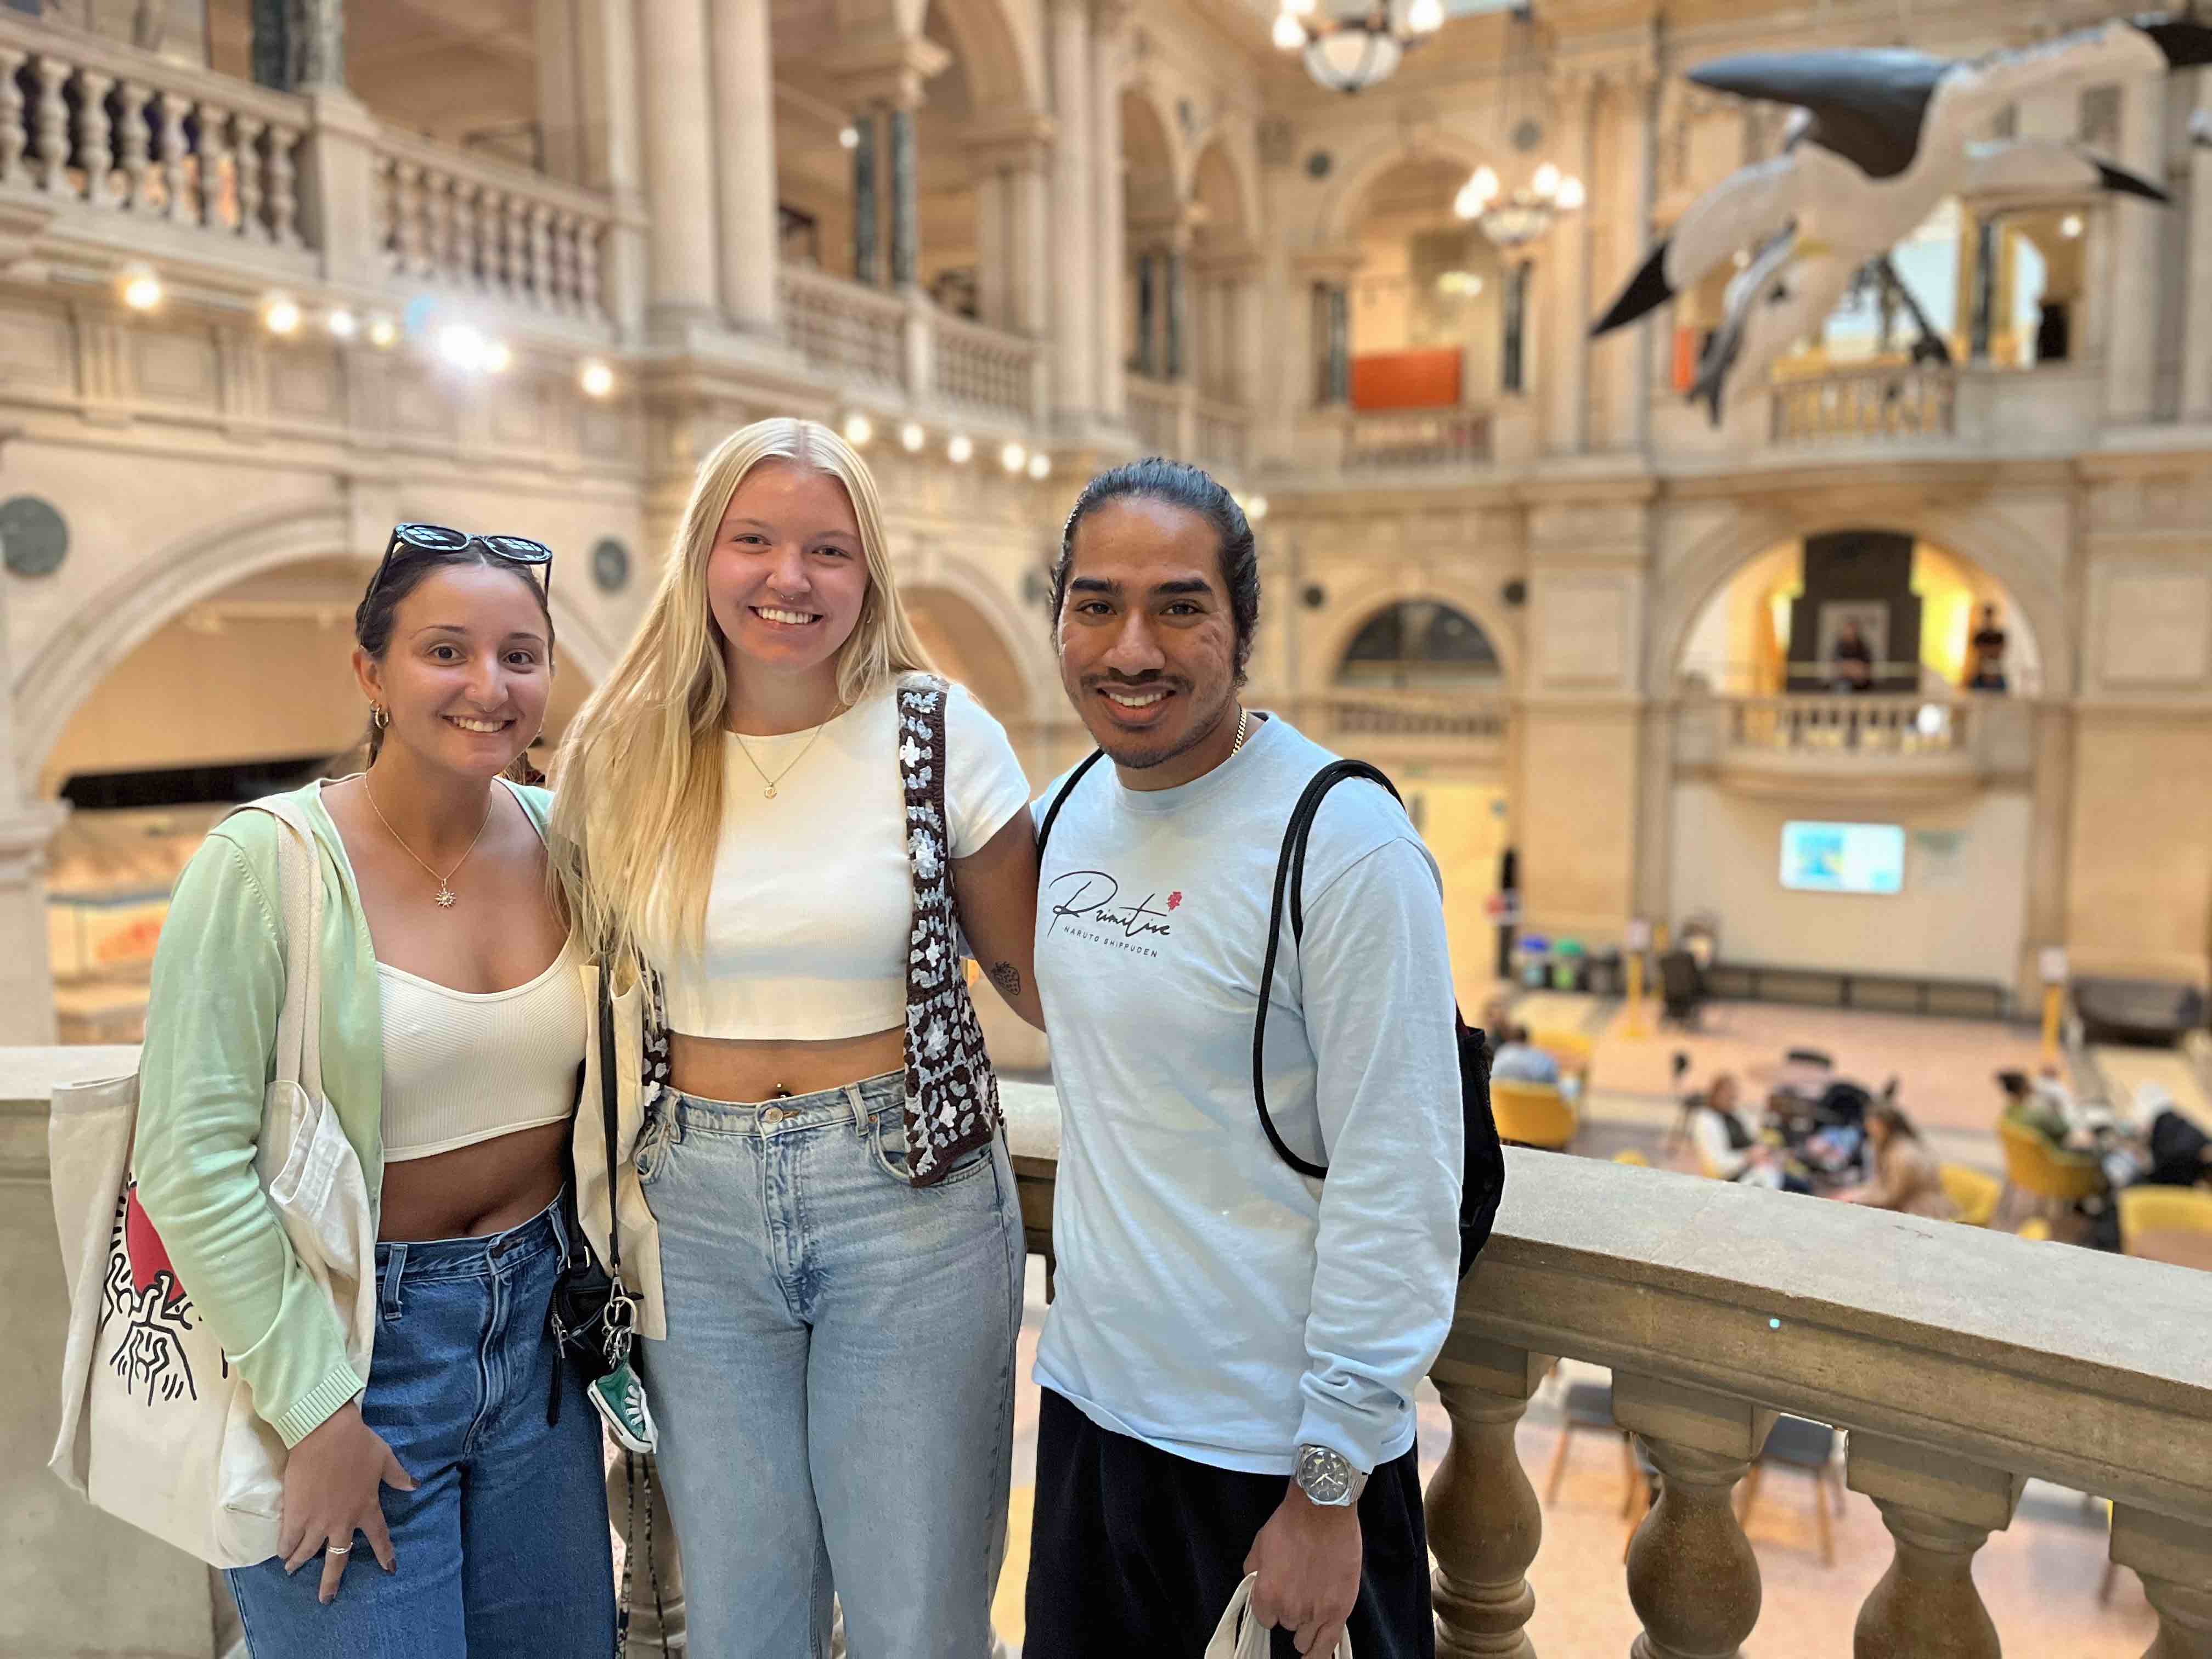 Three students visiting an art gallery in Bristol, England